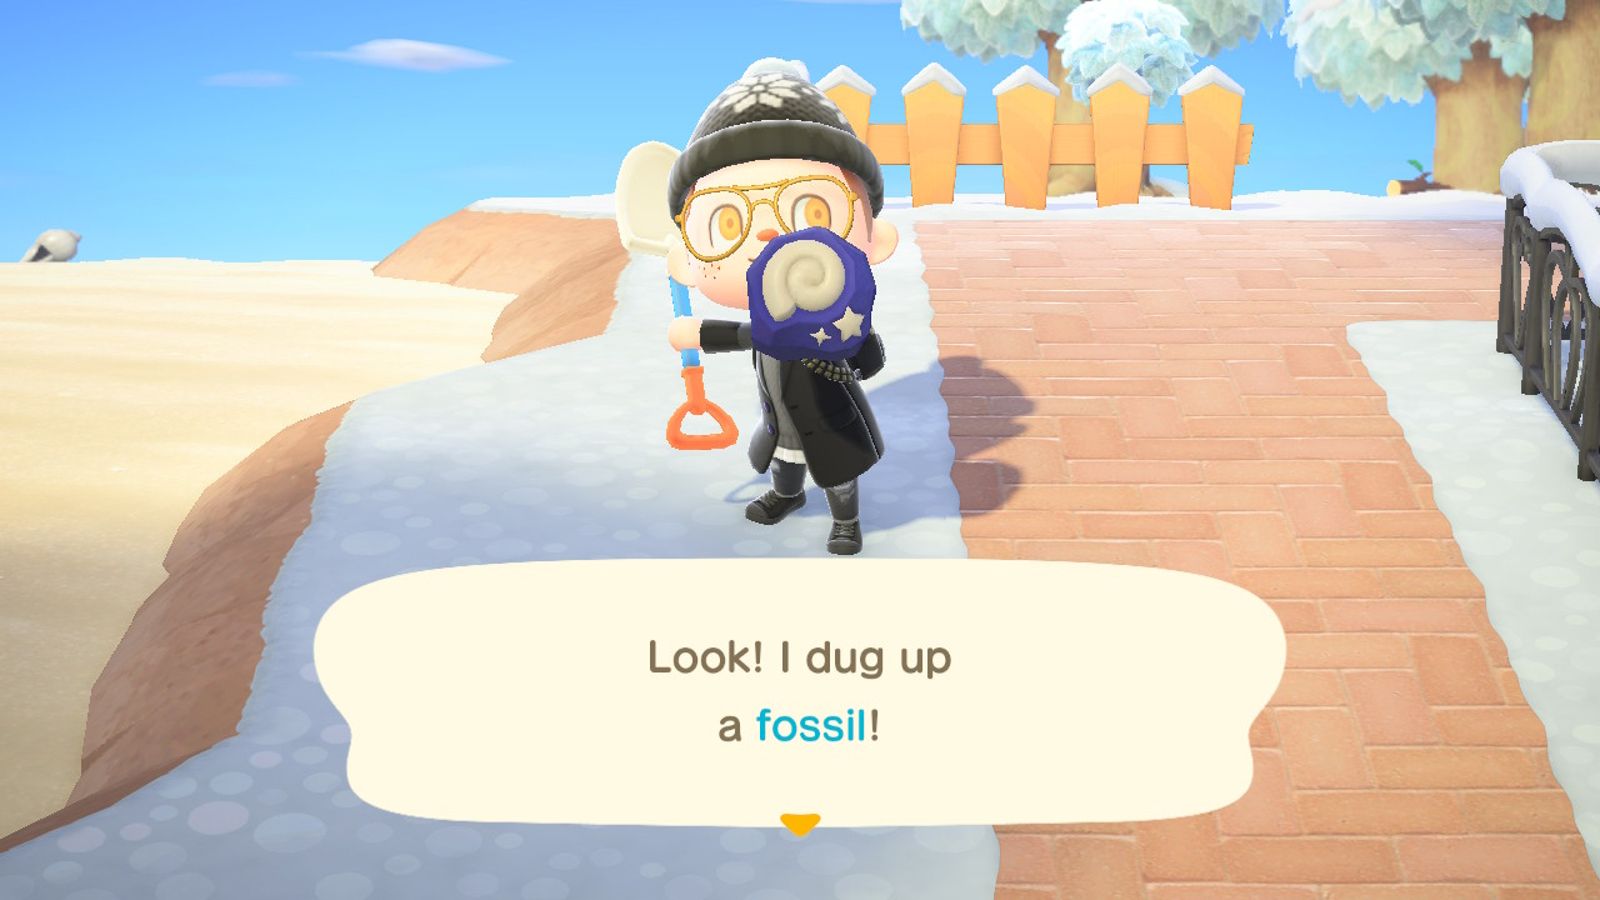 Players can find four fossils every day in Animal Crossing: New Horizons.